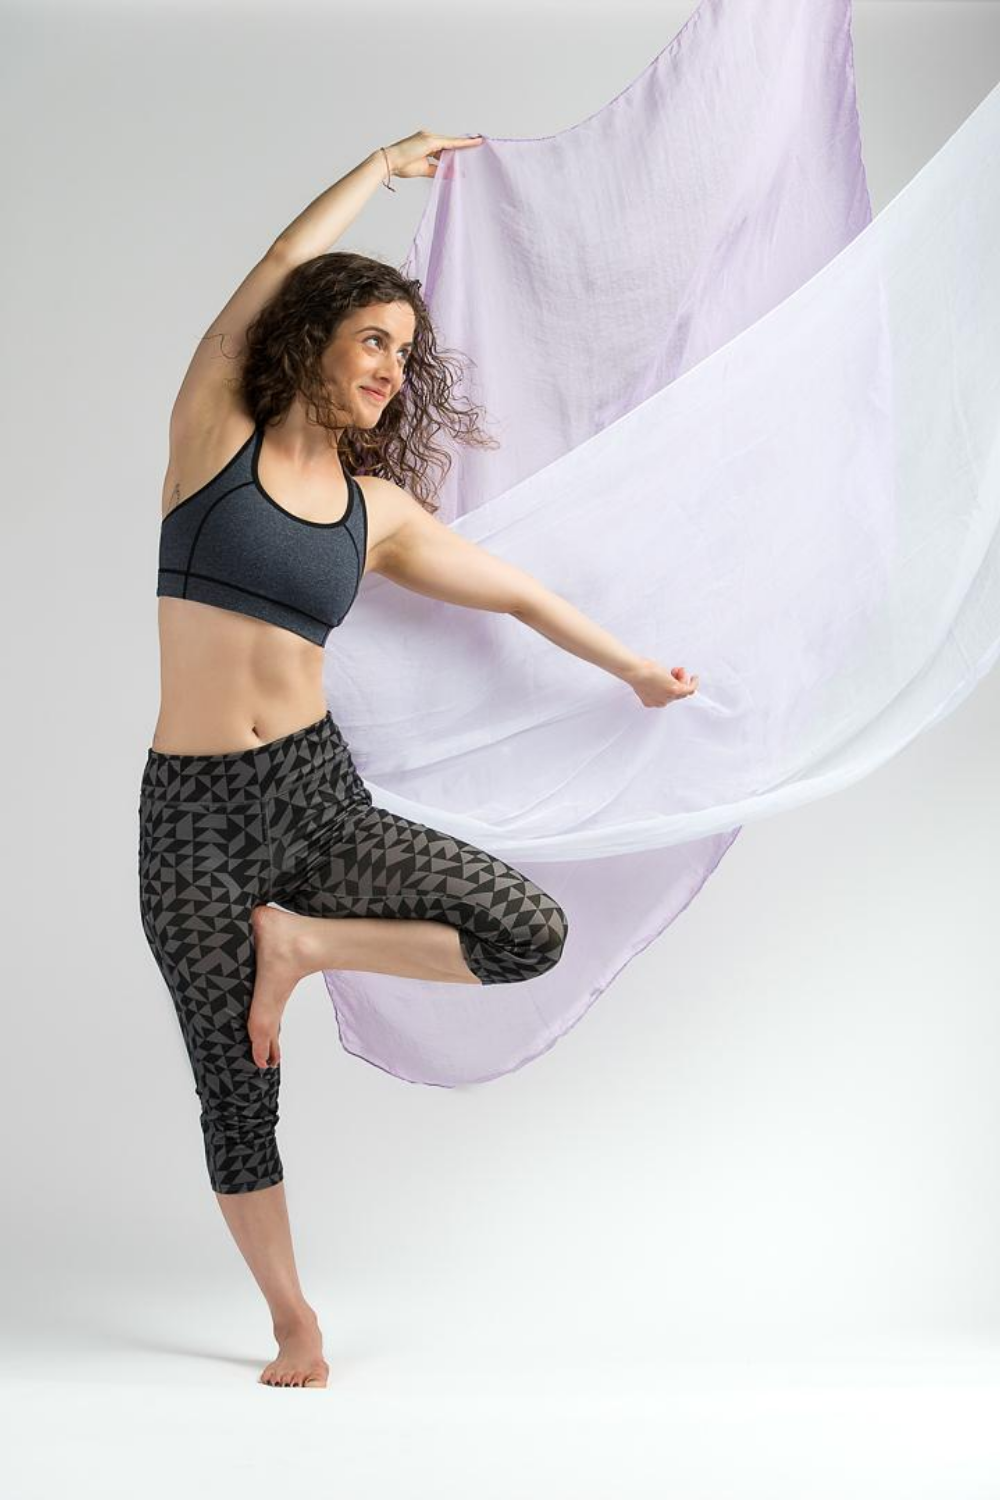 Organic Yoga Clothing Companies  International Society of Precision  Agriculture